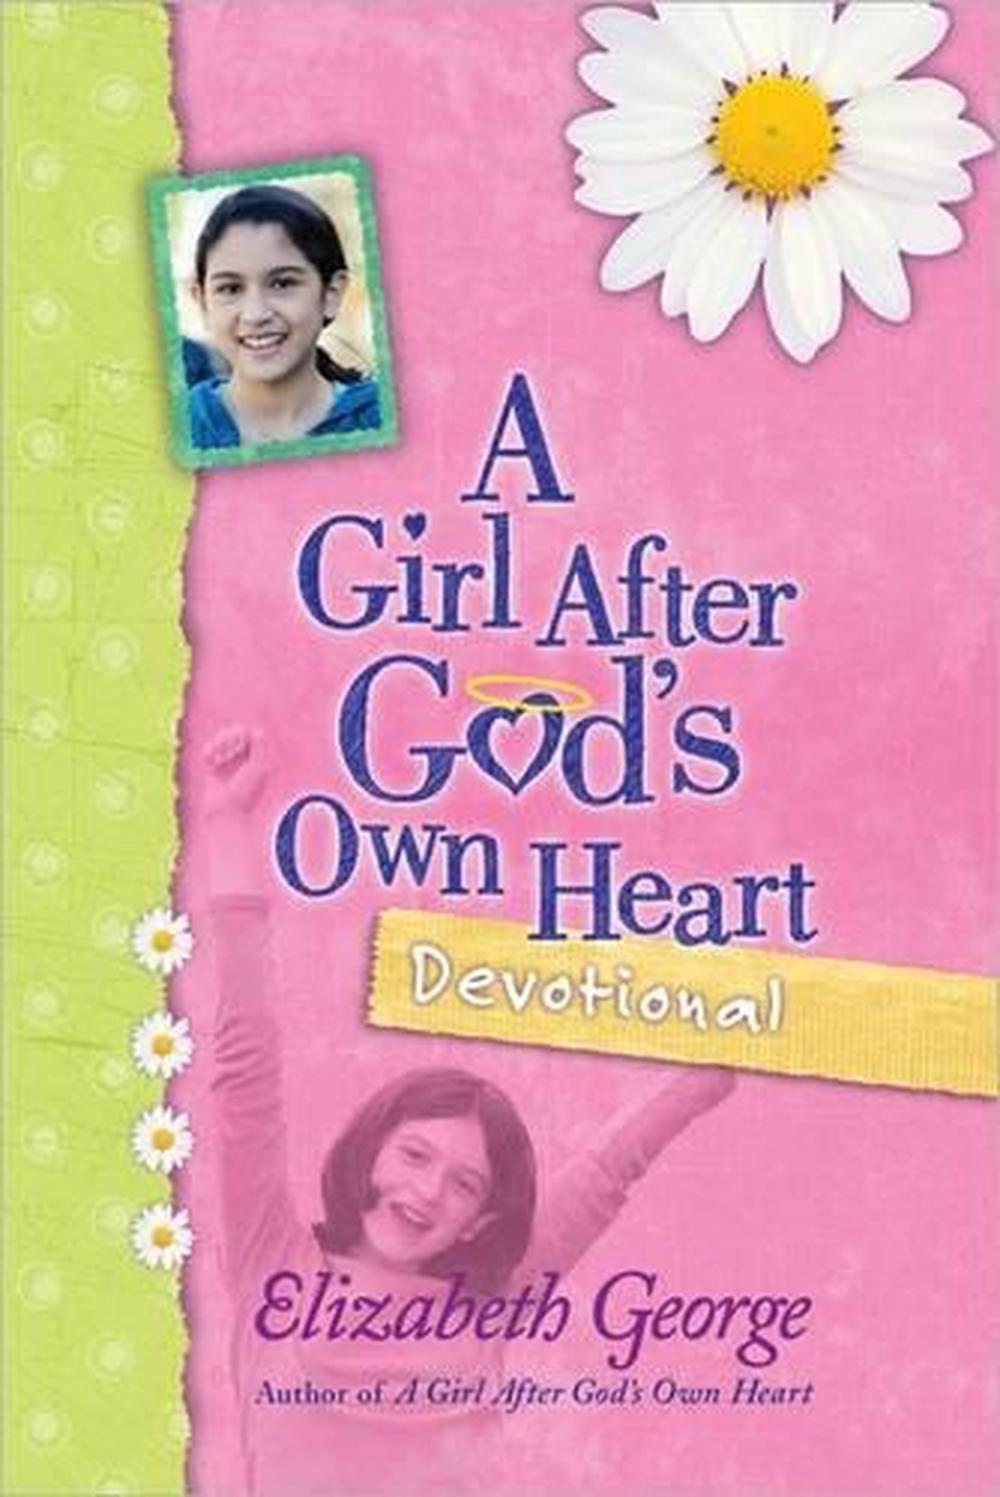 A Girl After Gods Own Heart Devotional By Elizabeth George English 